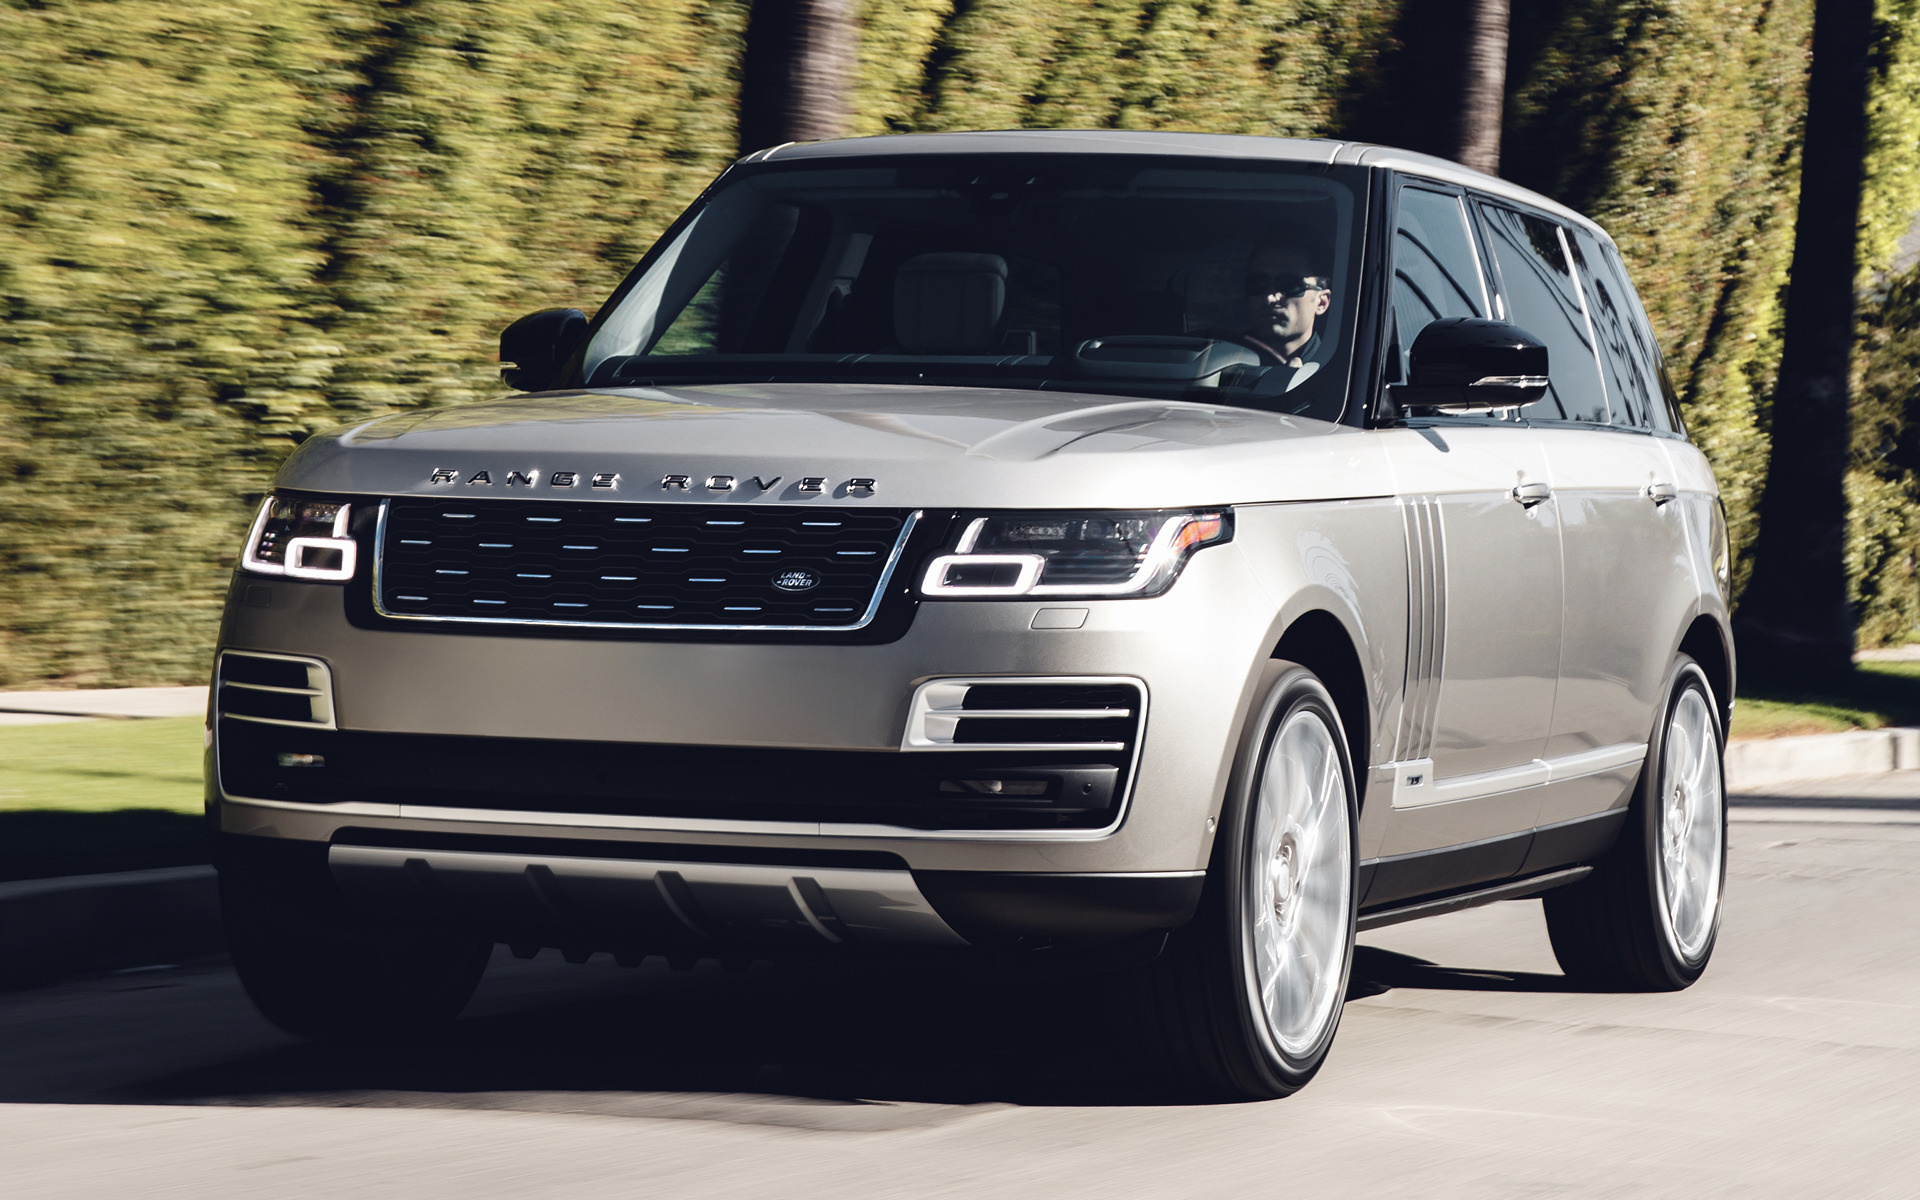 2018 Range Rover SVAutobiography [LWB] (US) - Wallpapers and HD Images ...